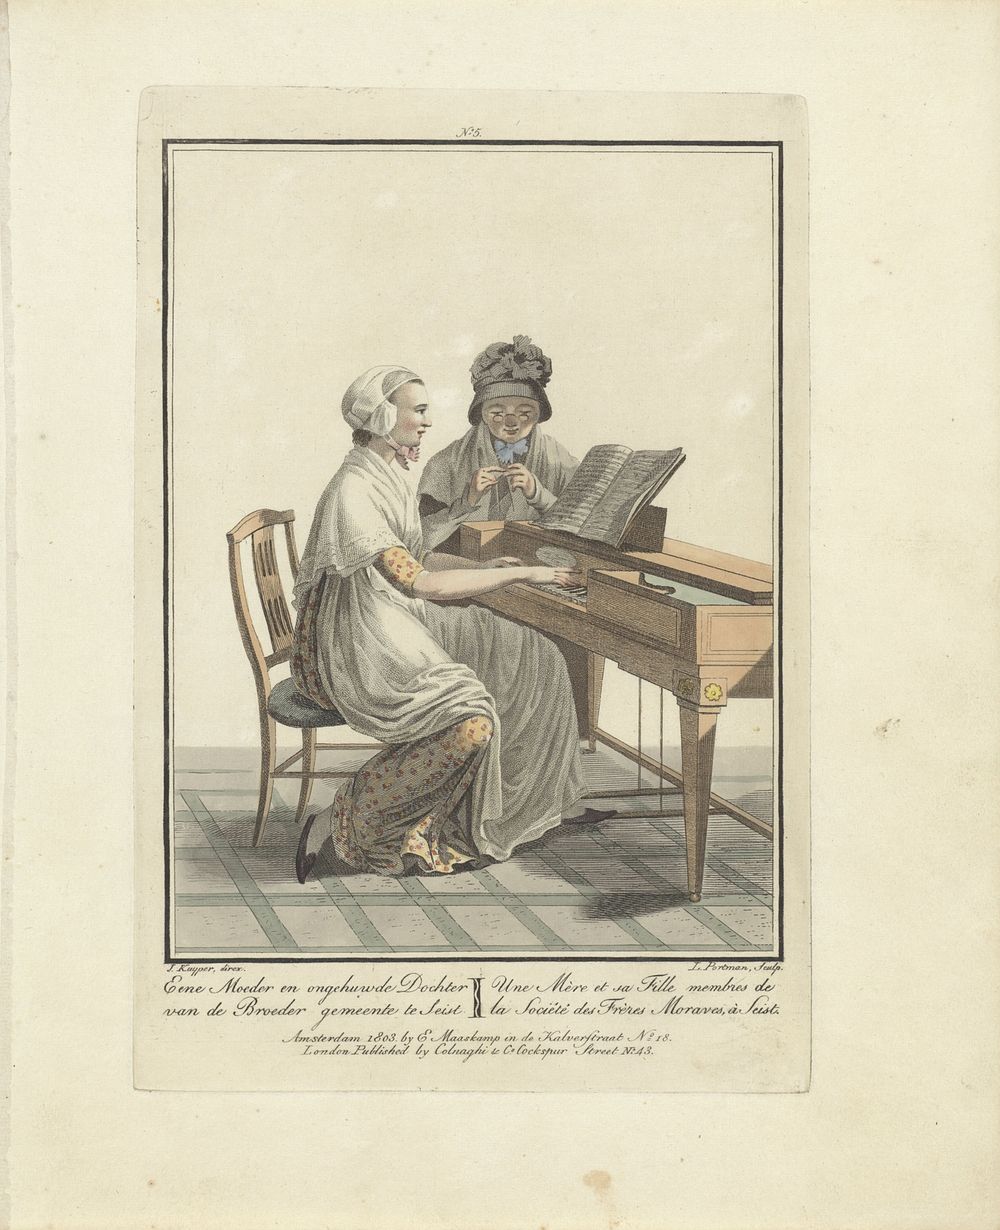 Young Lady Playing the Square Piano (1803 - 1807) by Ludwig Gottlieb Portman, Jacques Kuyper, Jacques Kuyper, Evert Maaskamp…